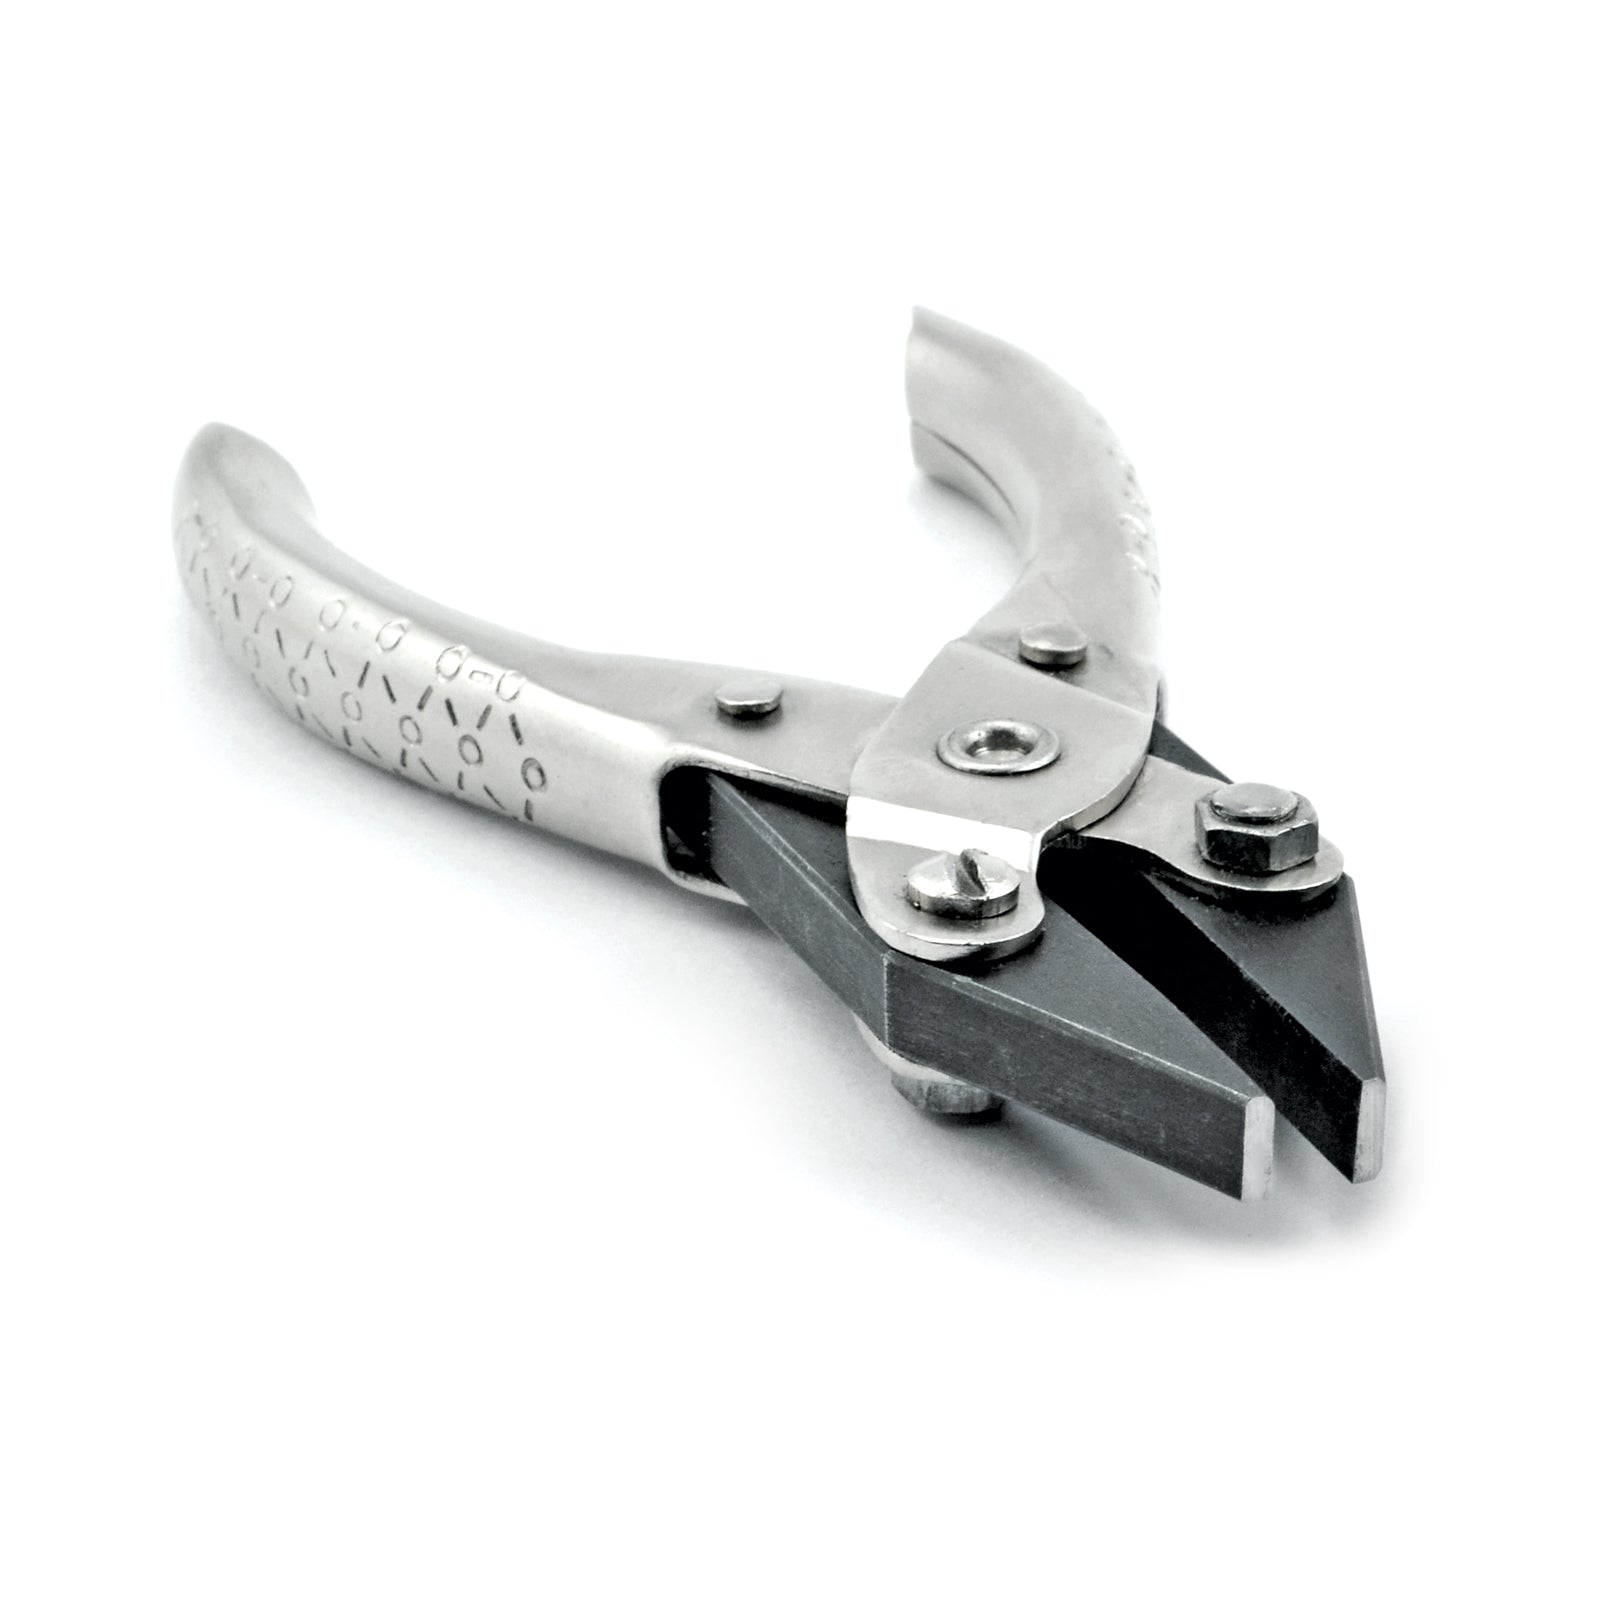 Parallel Jaw Plier, Flat Nose with Straight Jaws - Micro - Mark Nippers